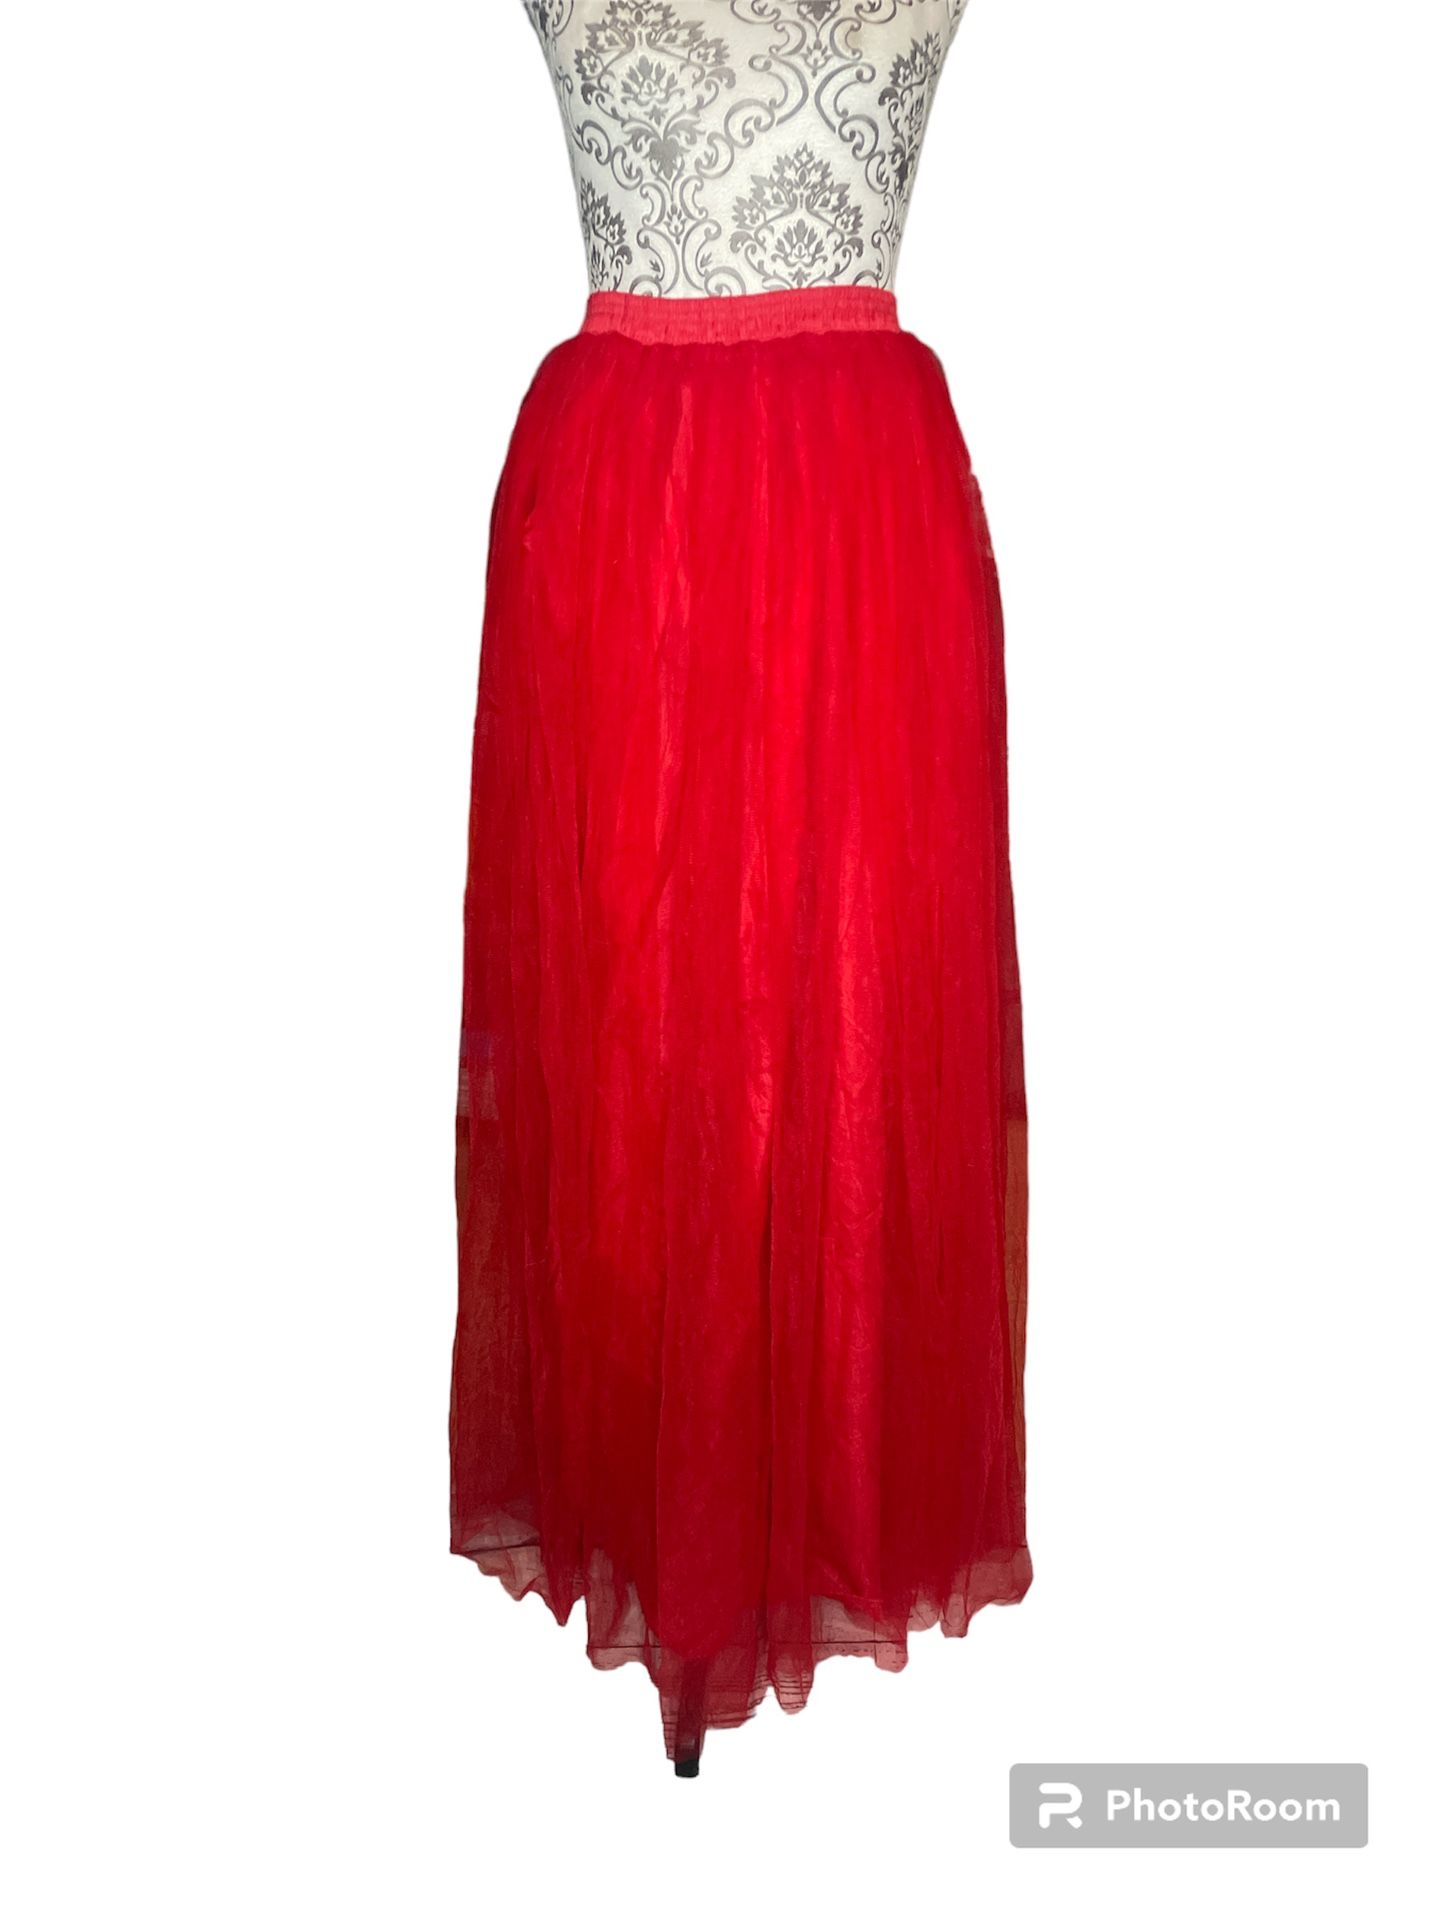 Maxi Long Tulle Skirt for Women Evening Party Wedding Skirts